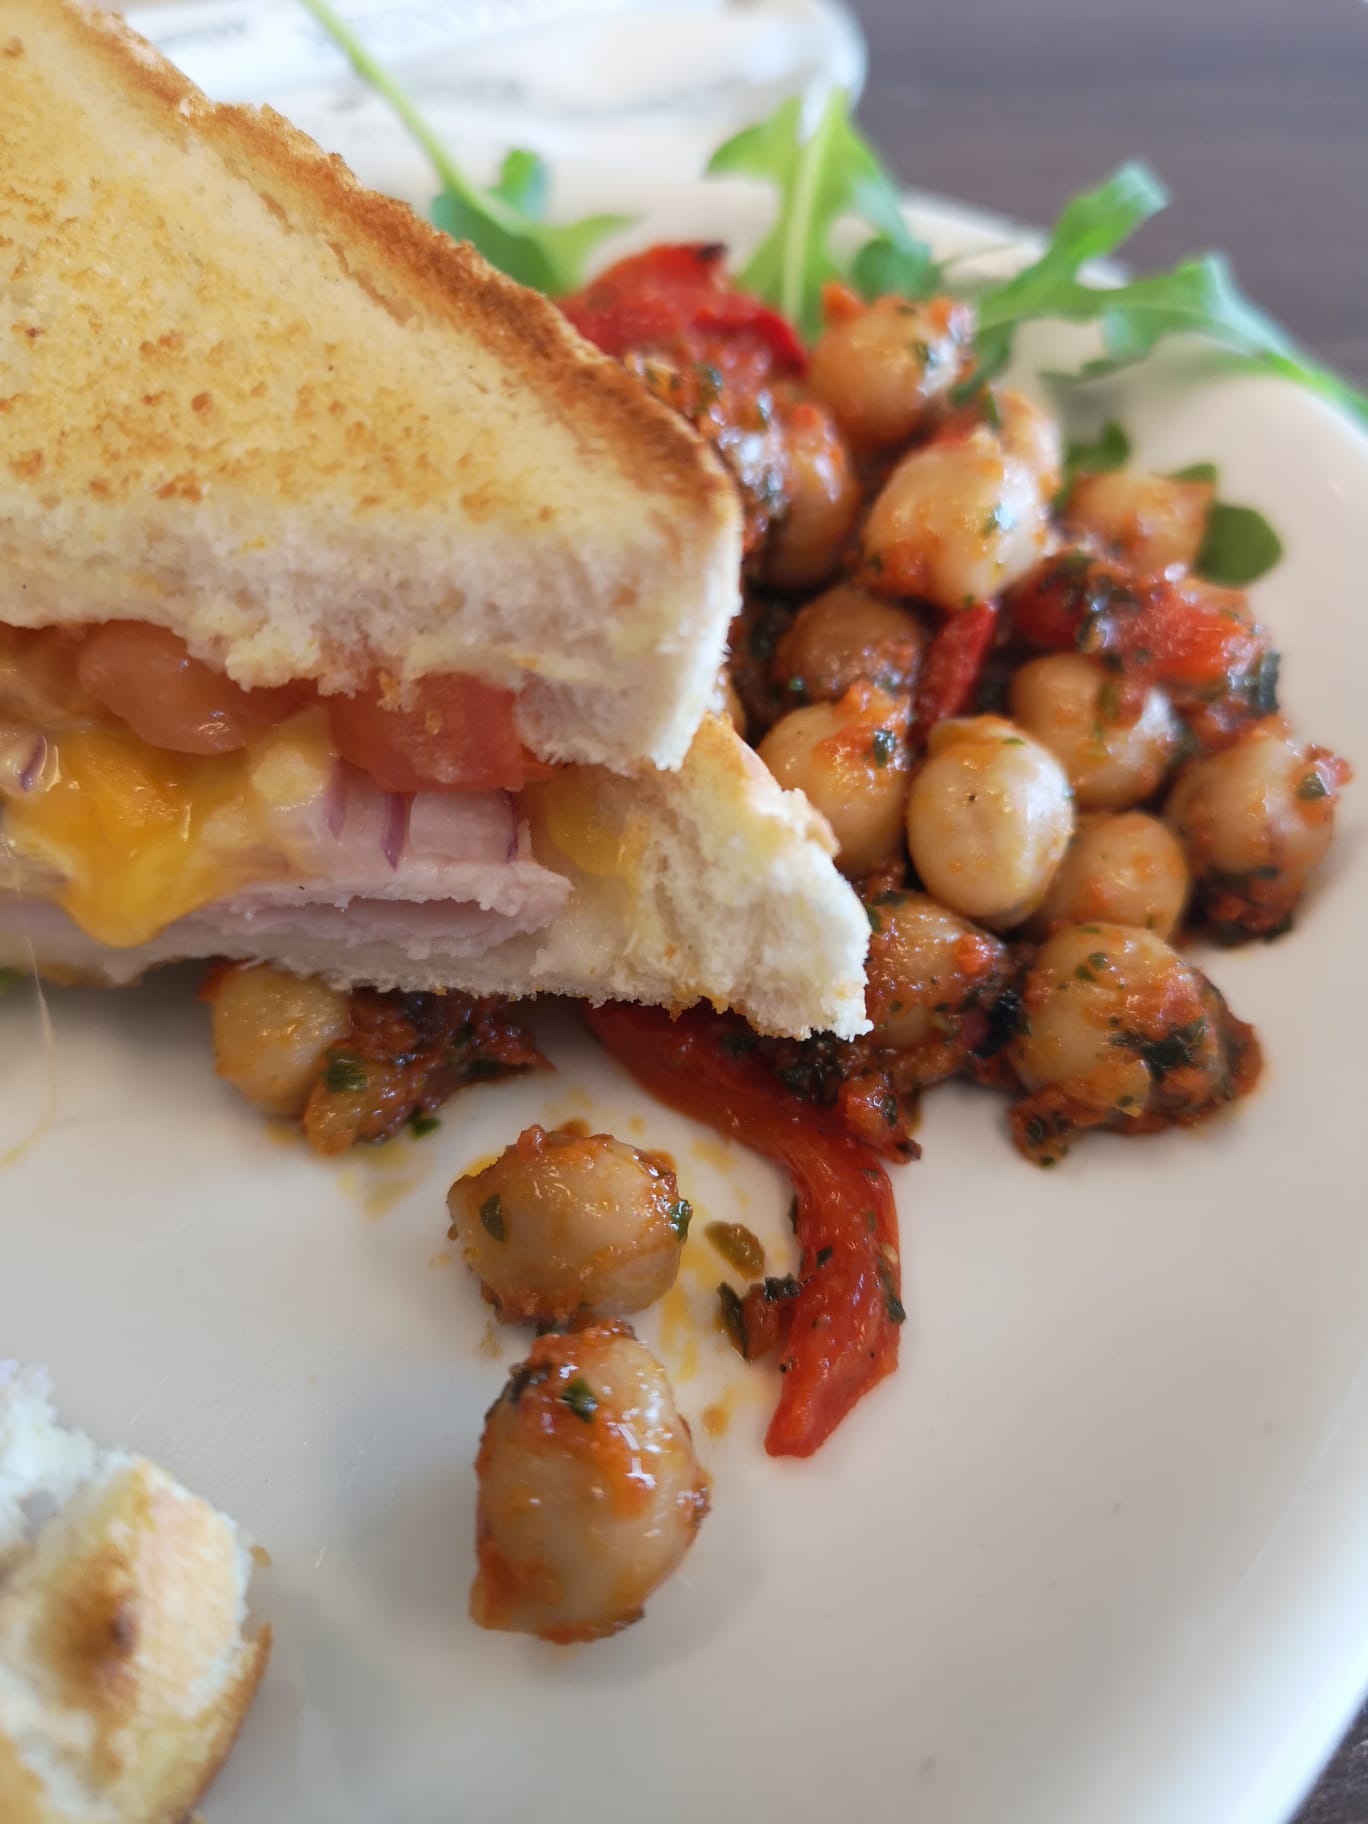 Toasted special with a chickpea salad at Meubles. Photo: Ken McGuire/Ken On Food